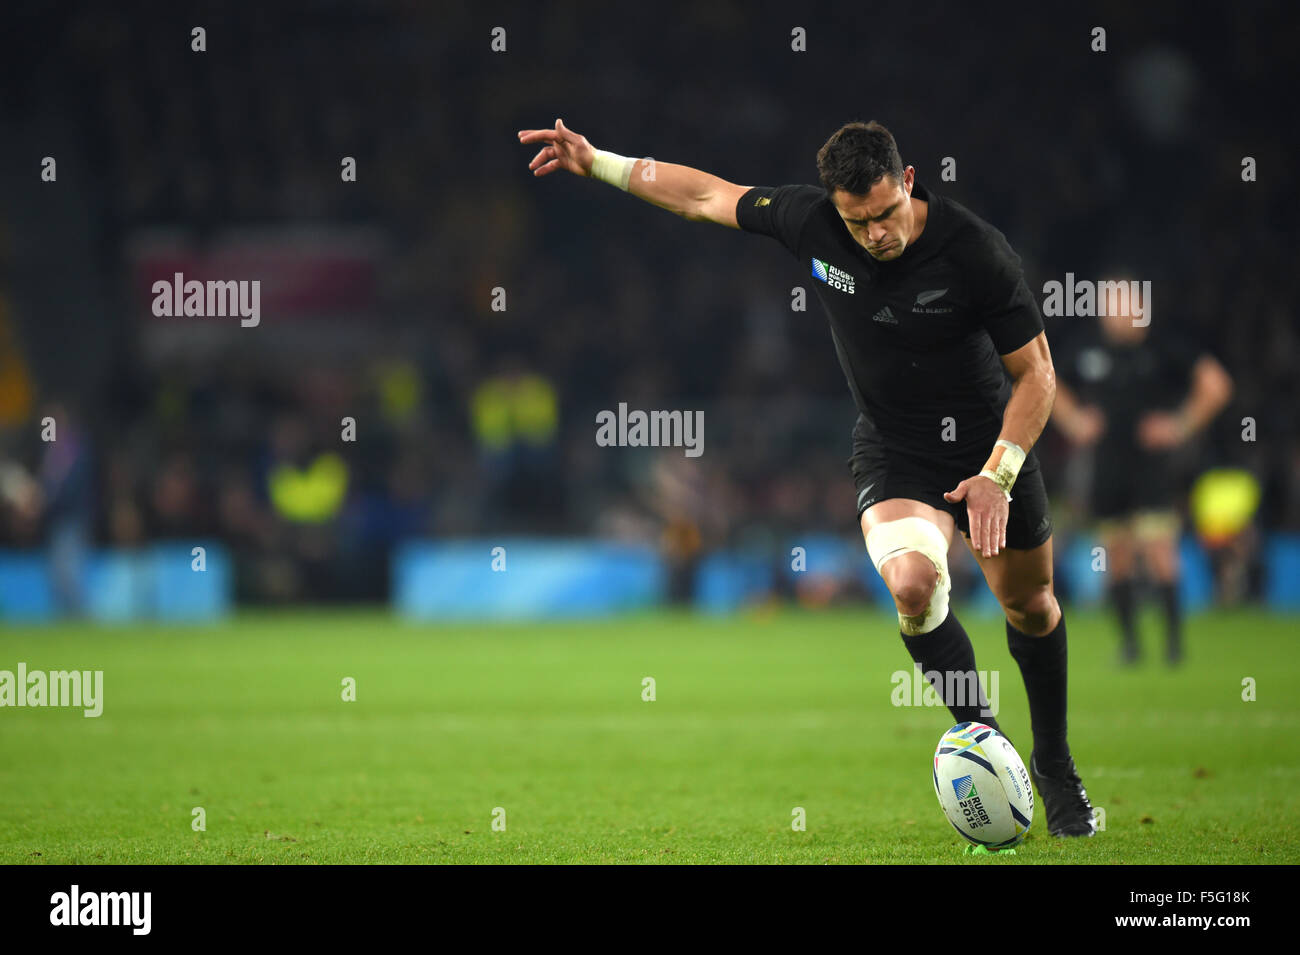 London, UK. 31st Oct, 2015. Dan Carter (NZL) Rugby : Dan Carter of New Zealand takes a kick during the 2015 Rugby World Cup final match between New Zealand and Australia at Twickenham in London, England . © FAR EAST PRESS/AFLO/Alamy Live News Stock Photo